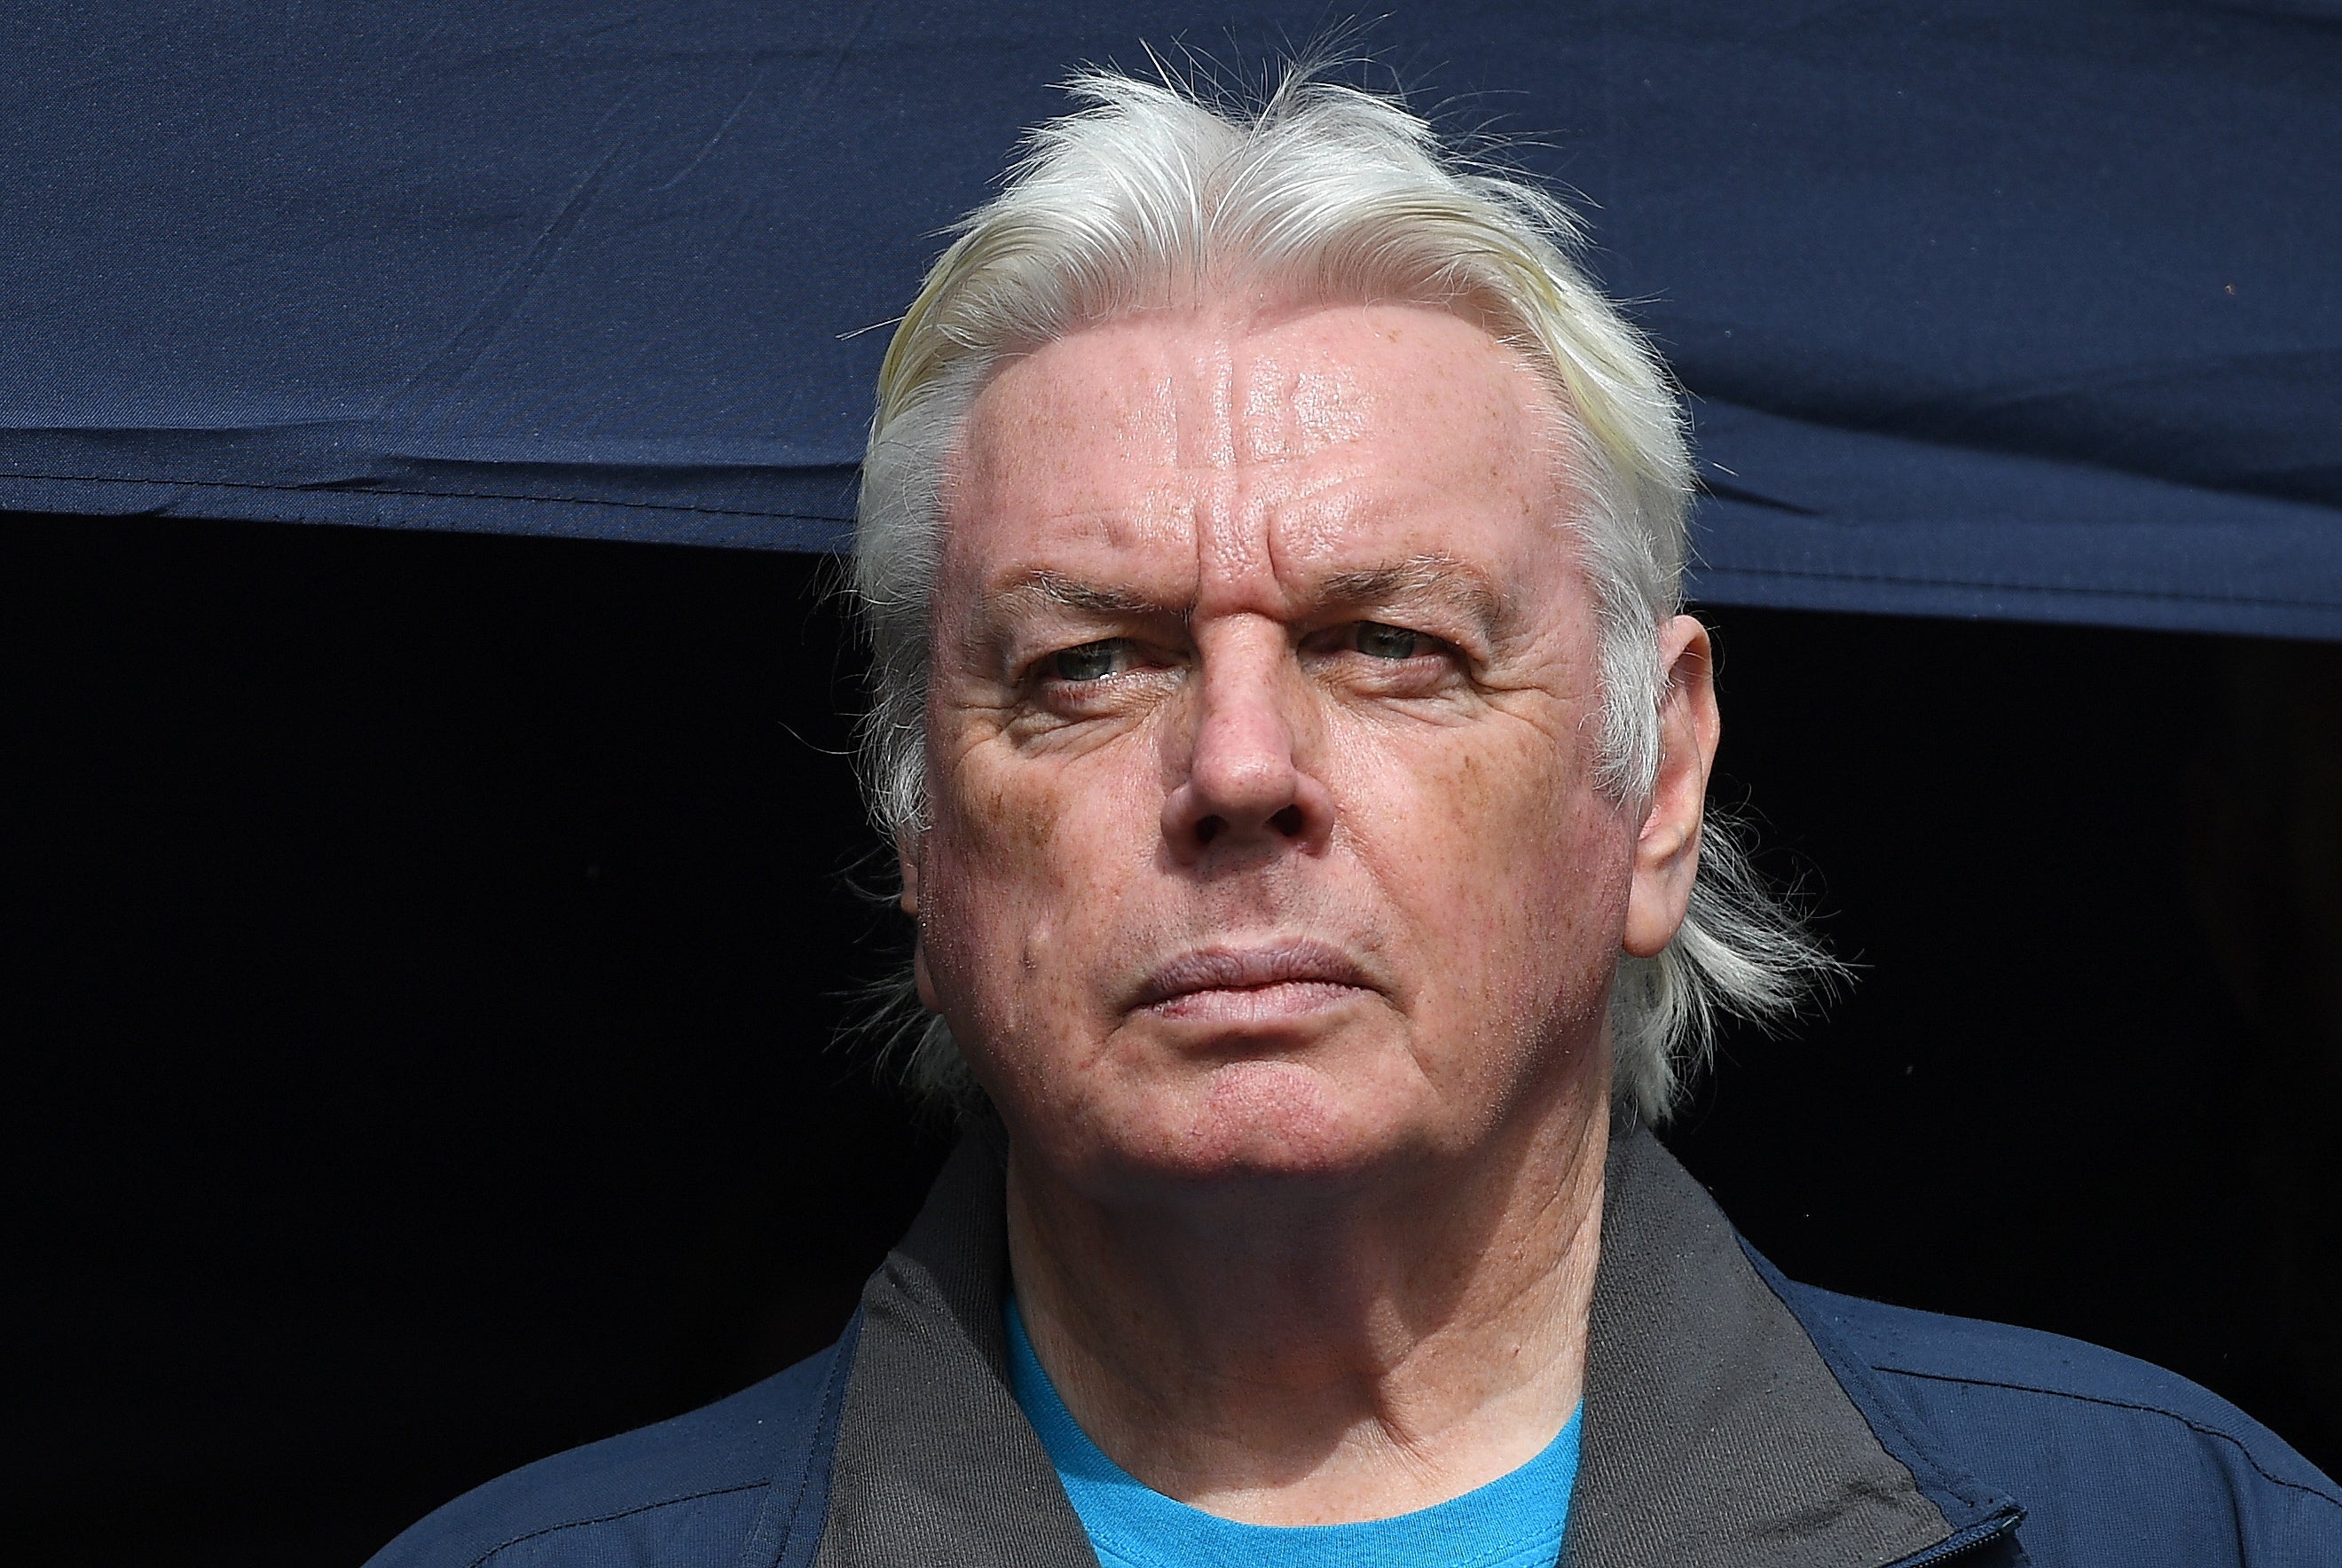 Conspiracy theorist David Icke’s Twitter account has been permanently suspended.